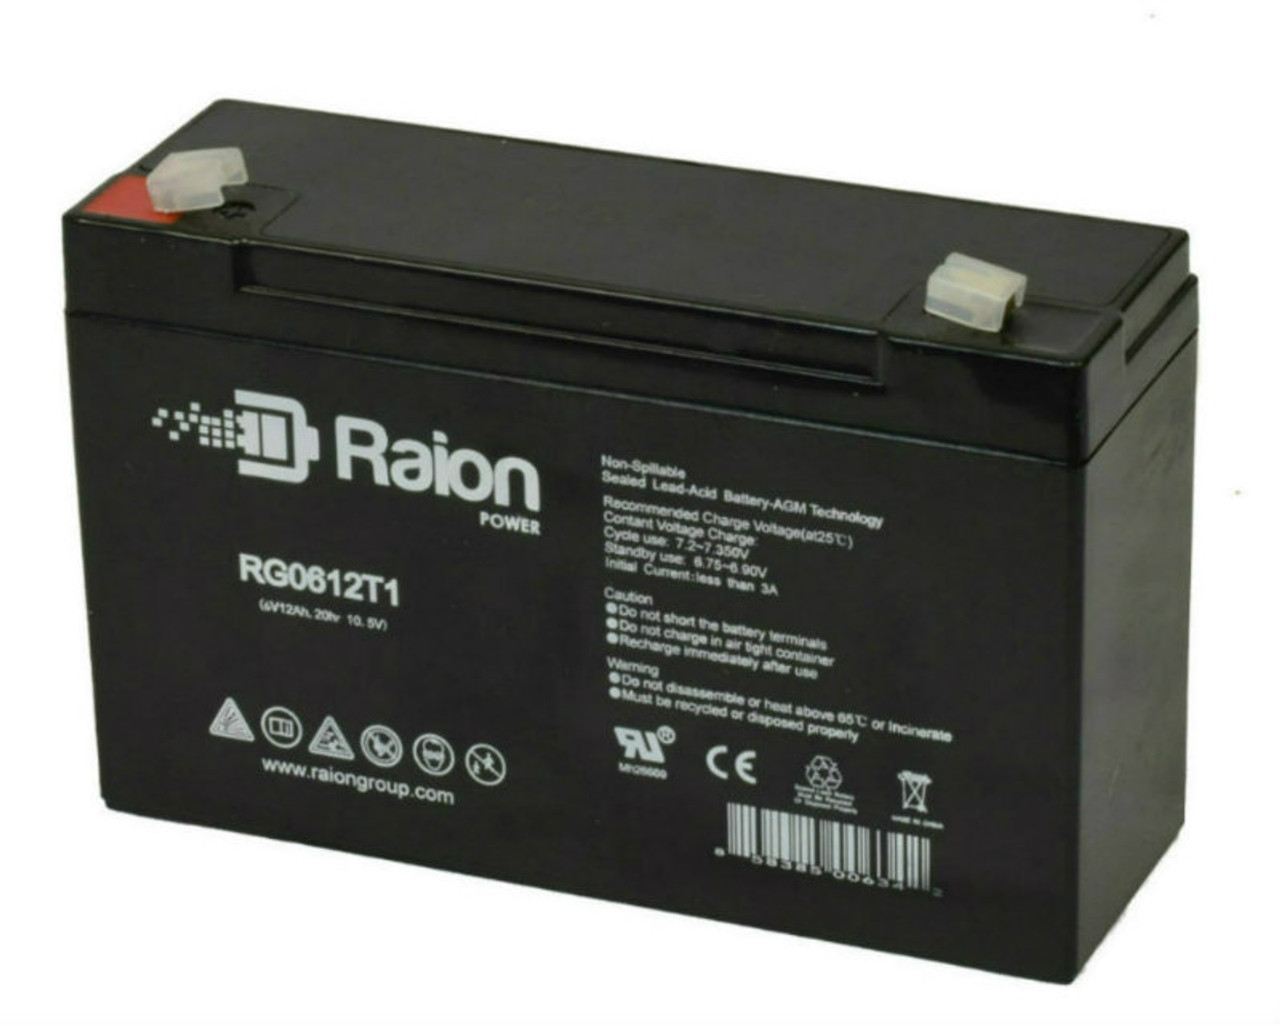 Raion Power RG06120T1 Replacement Battery for DriveMotion SB6120